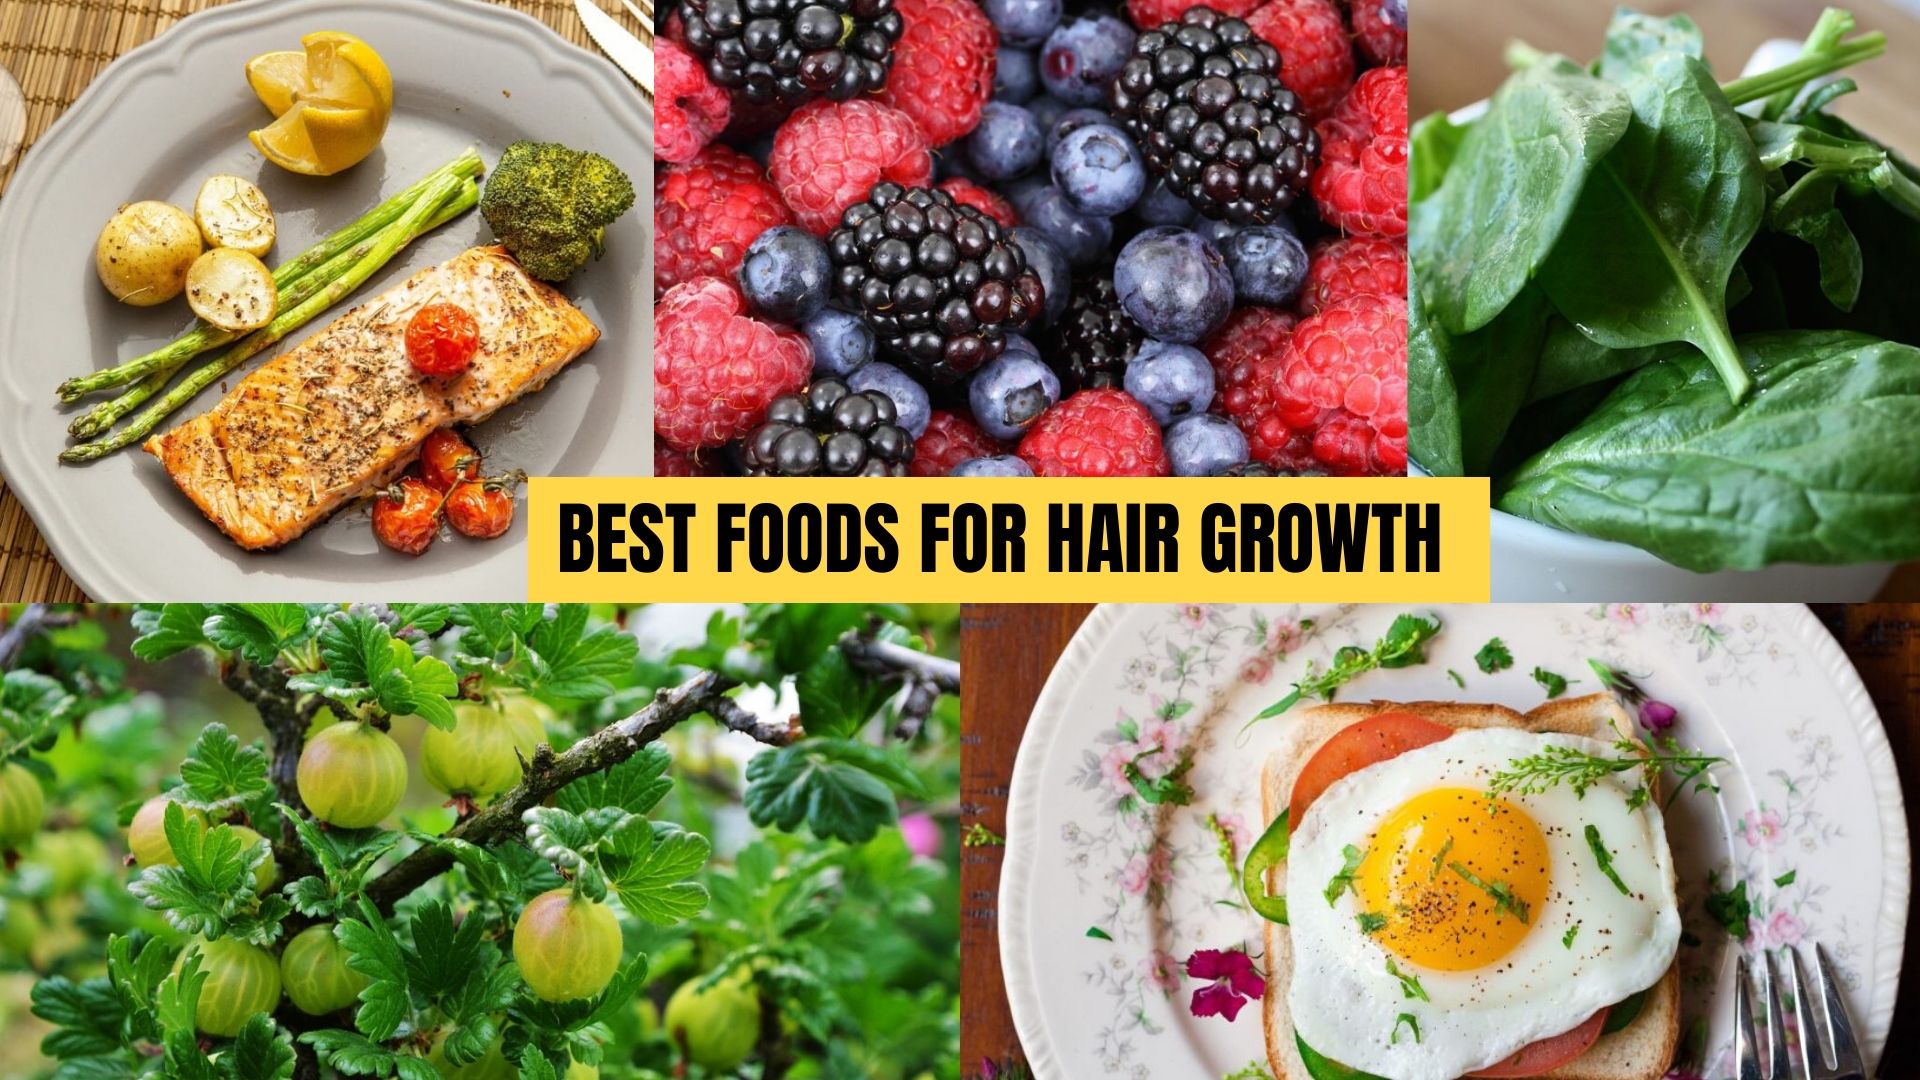 Best Foods For Hair Growth | What To Eat For Healthy Hair